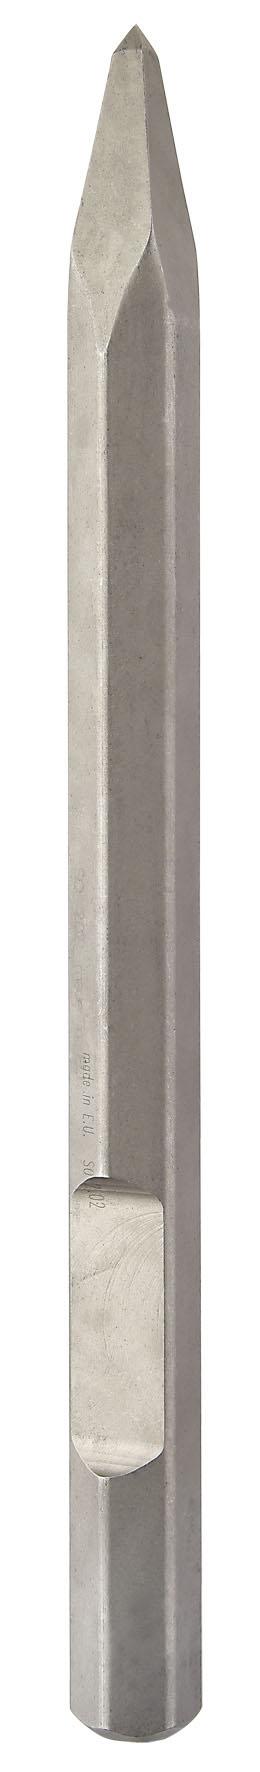 Drilling Pointed chisel Pointed chisel hexagonal 28 mm with 70 mm flat spot - 354.jpg